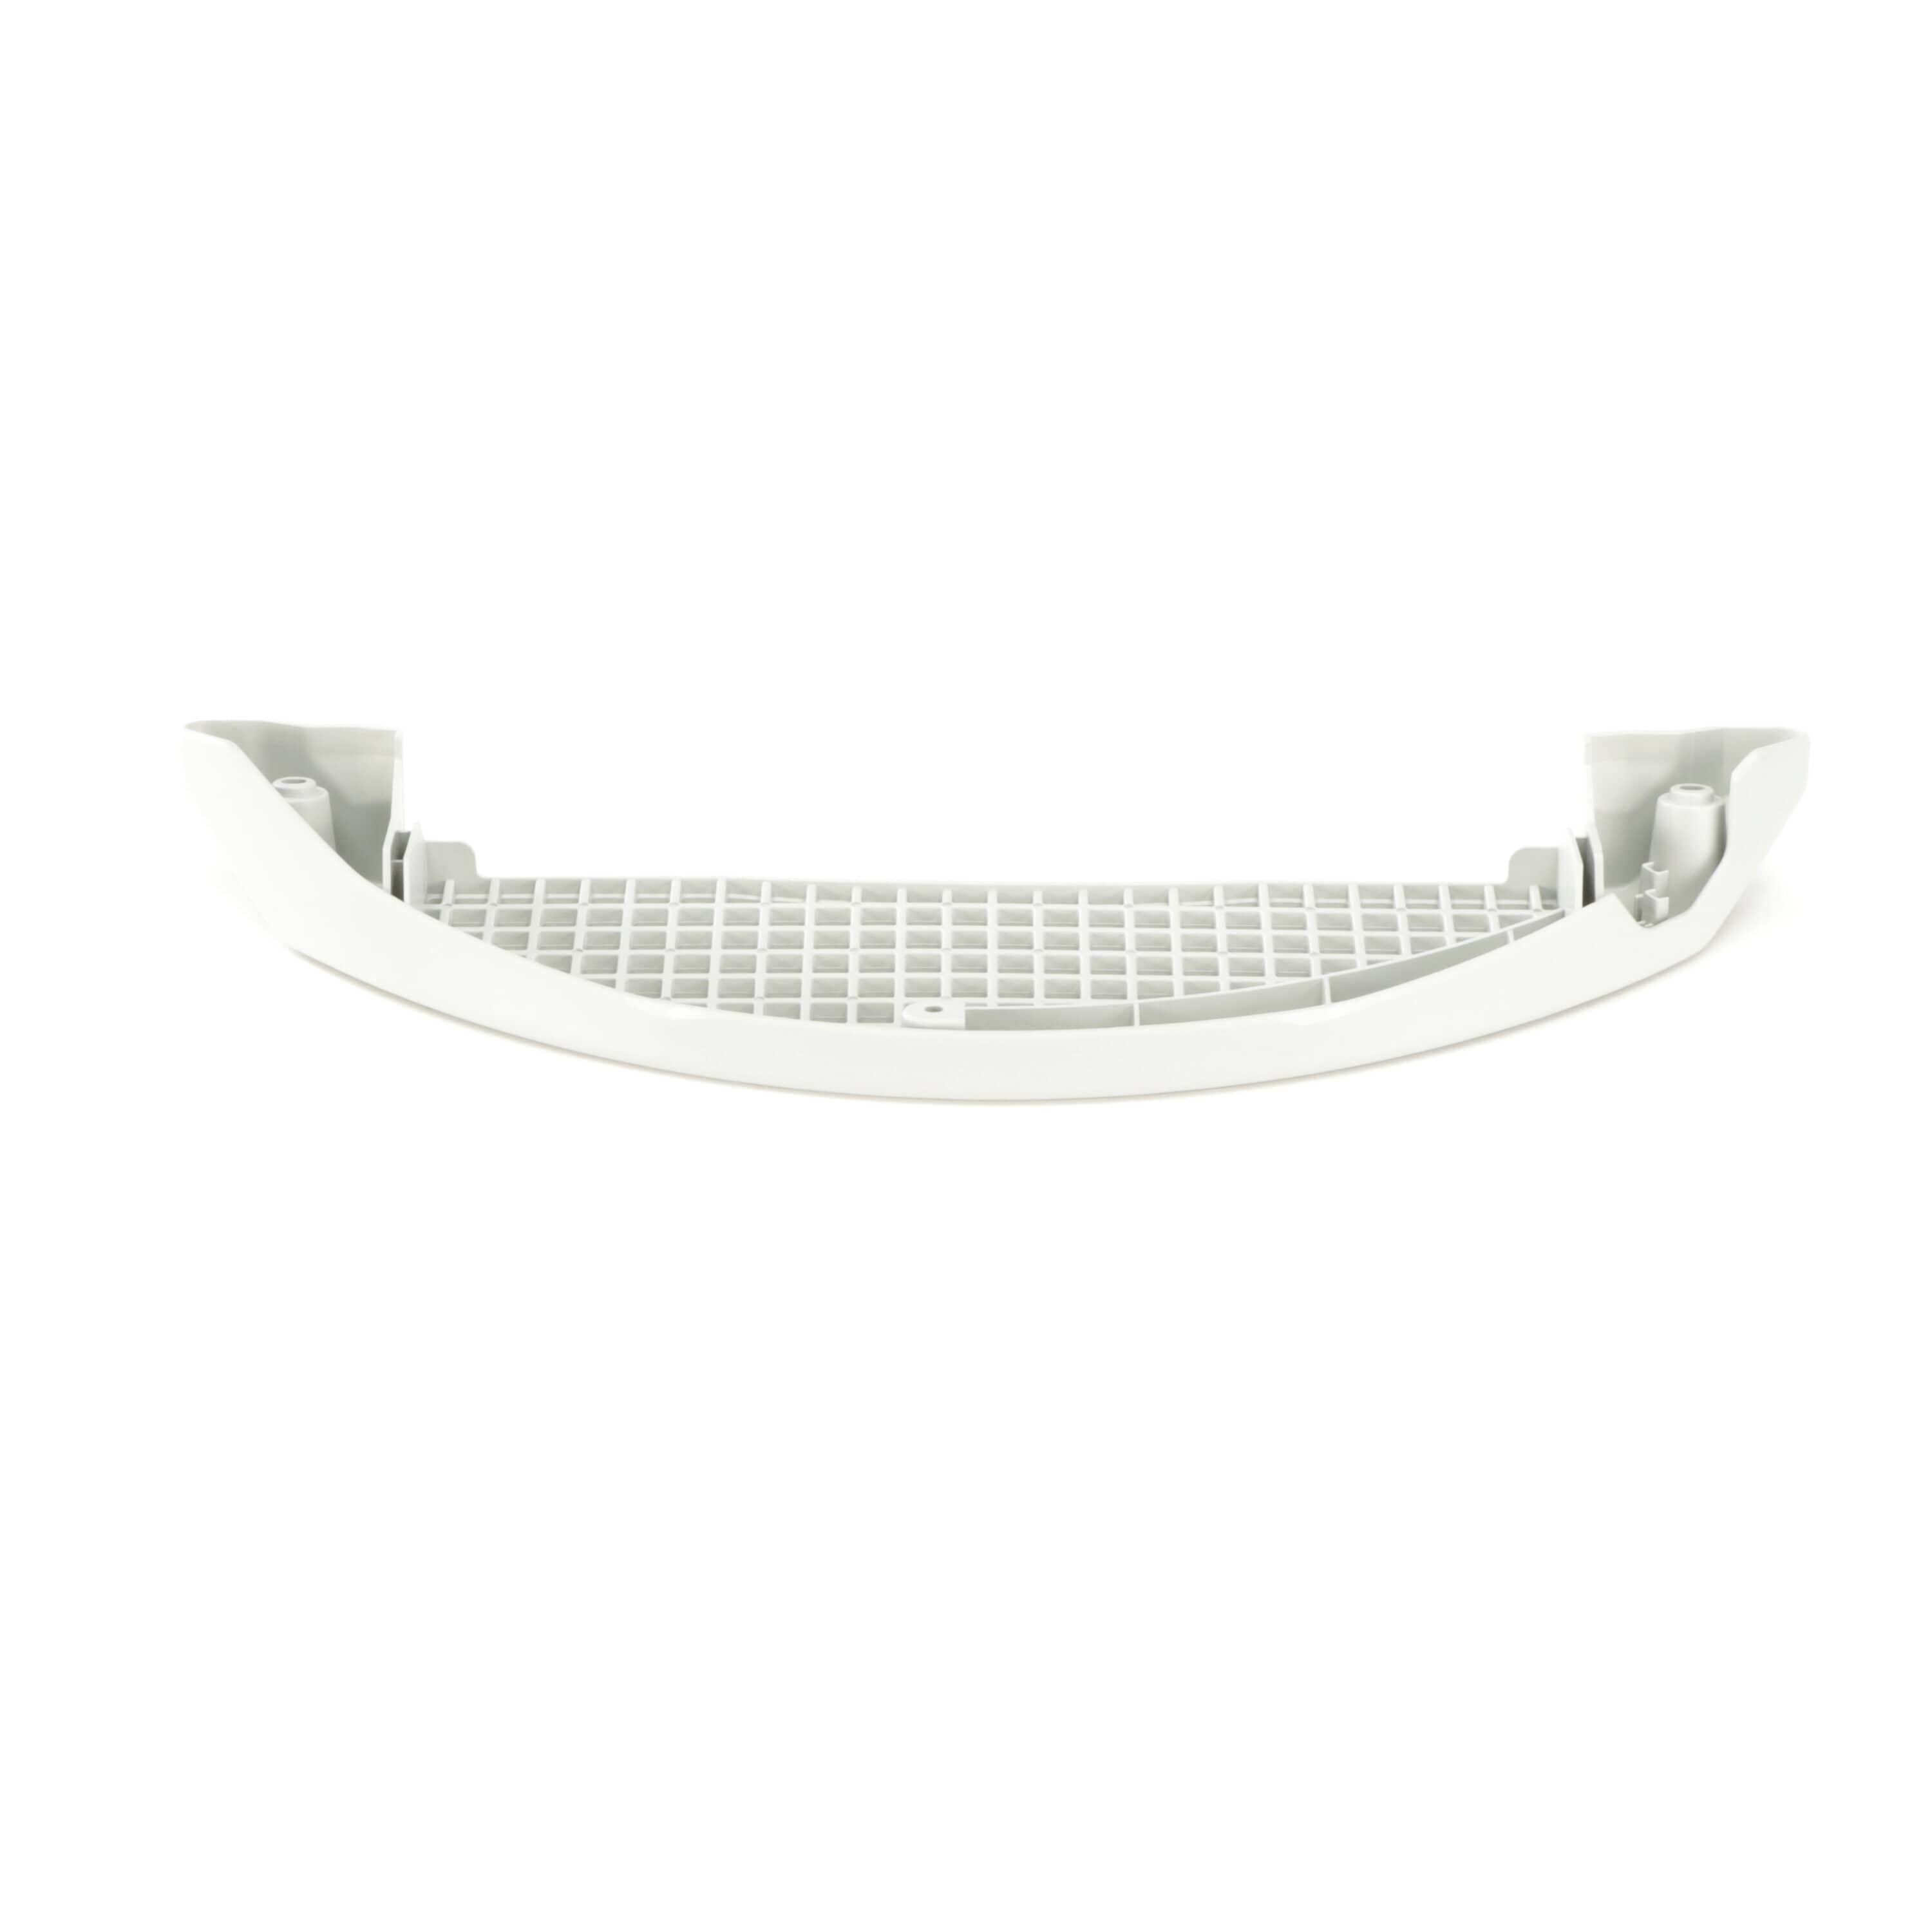 LG 3550EL1005C Dryer Lint Filter Guide And Grill